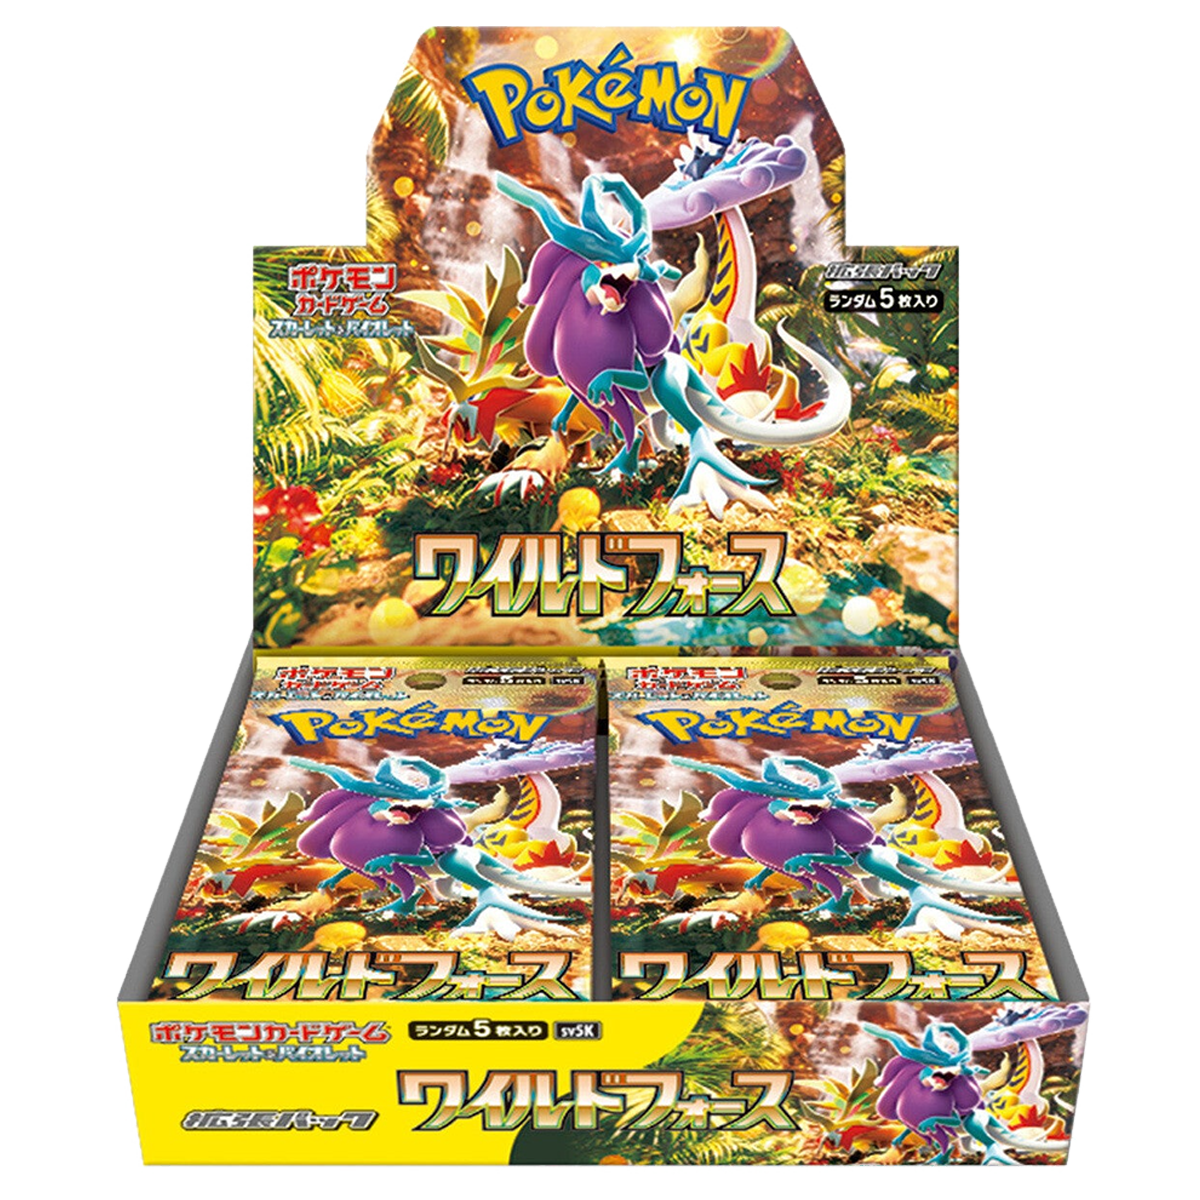 Japanese Wild Force Booster Box